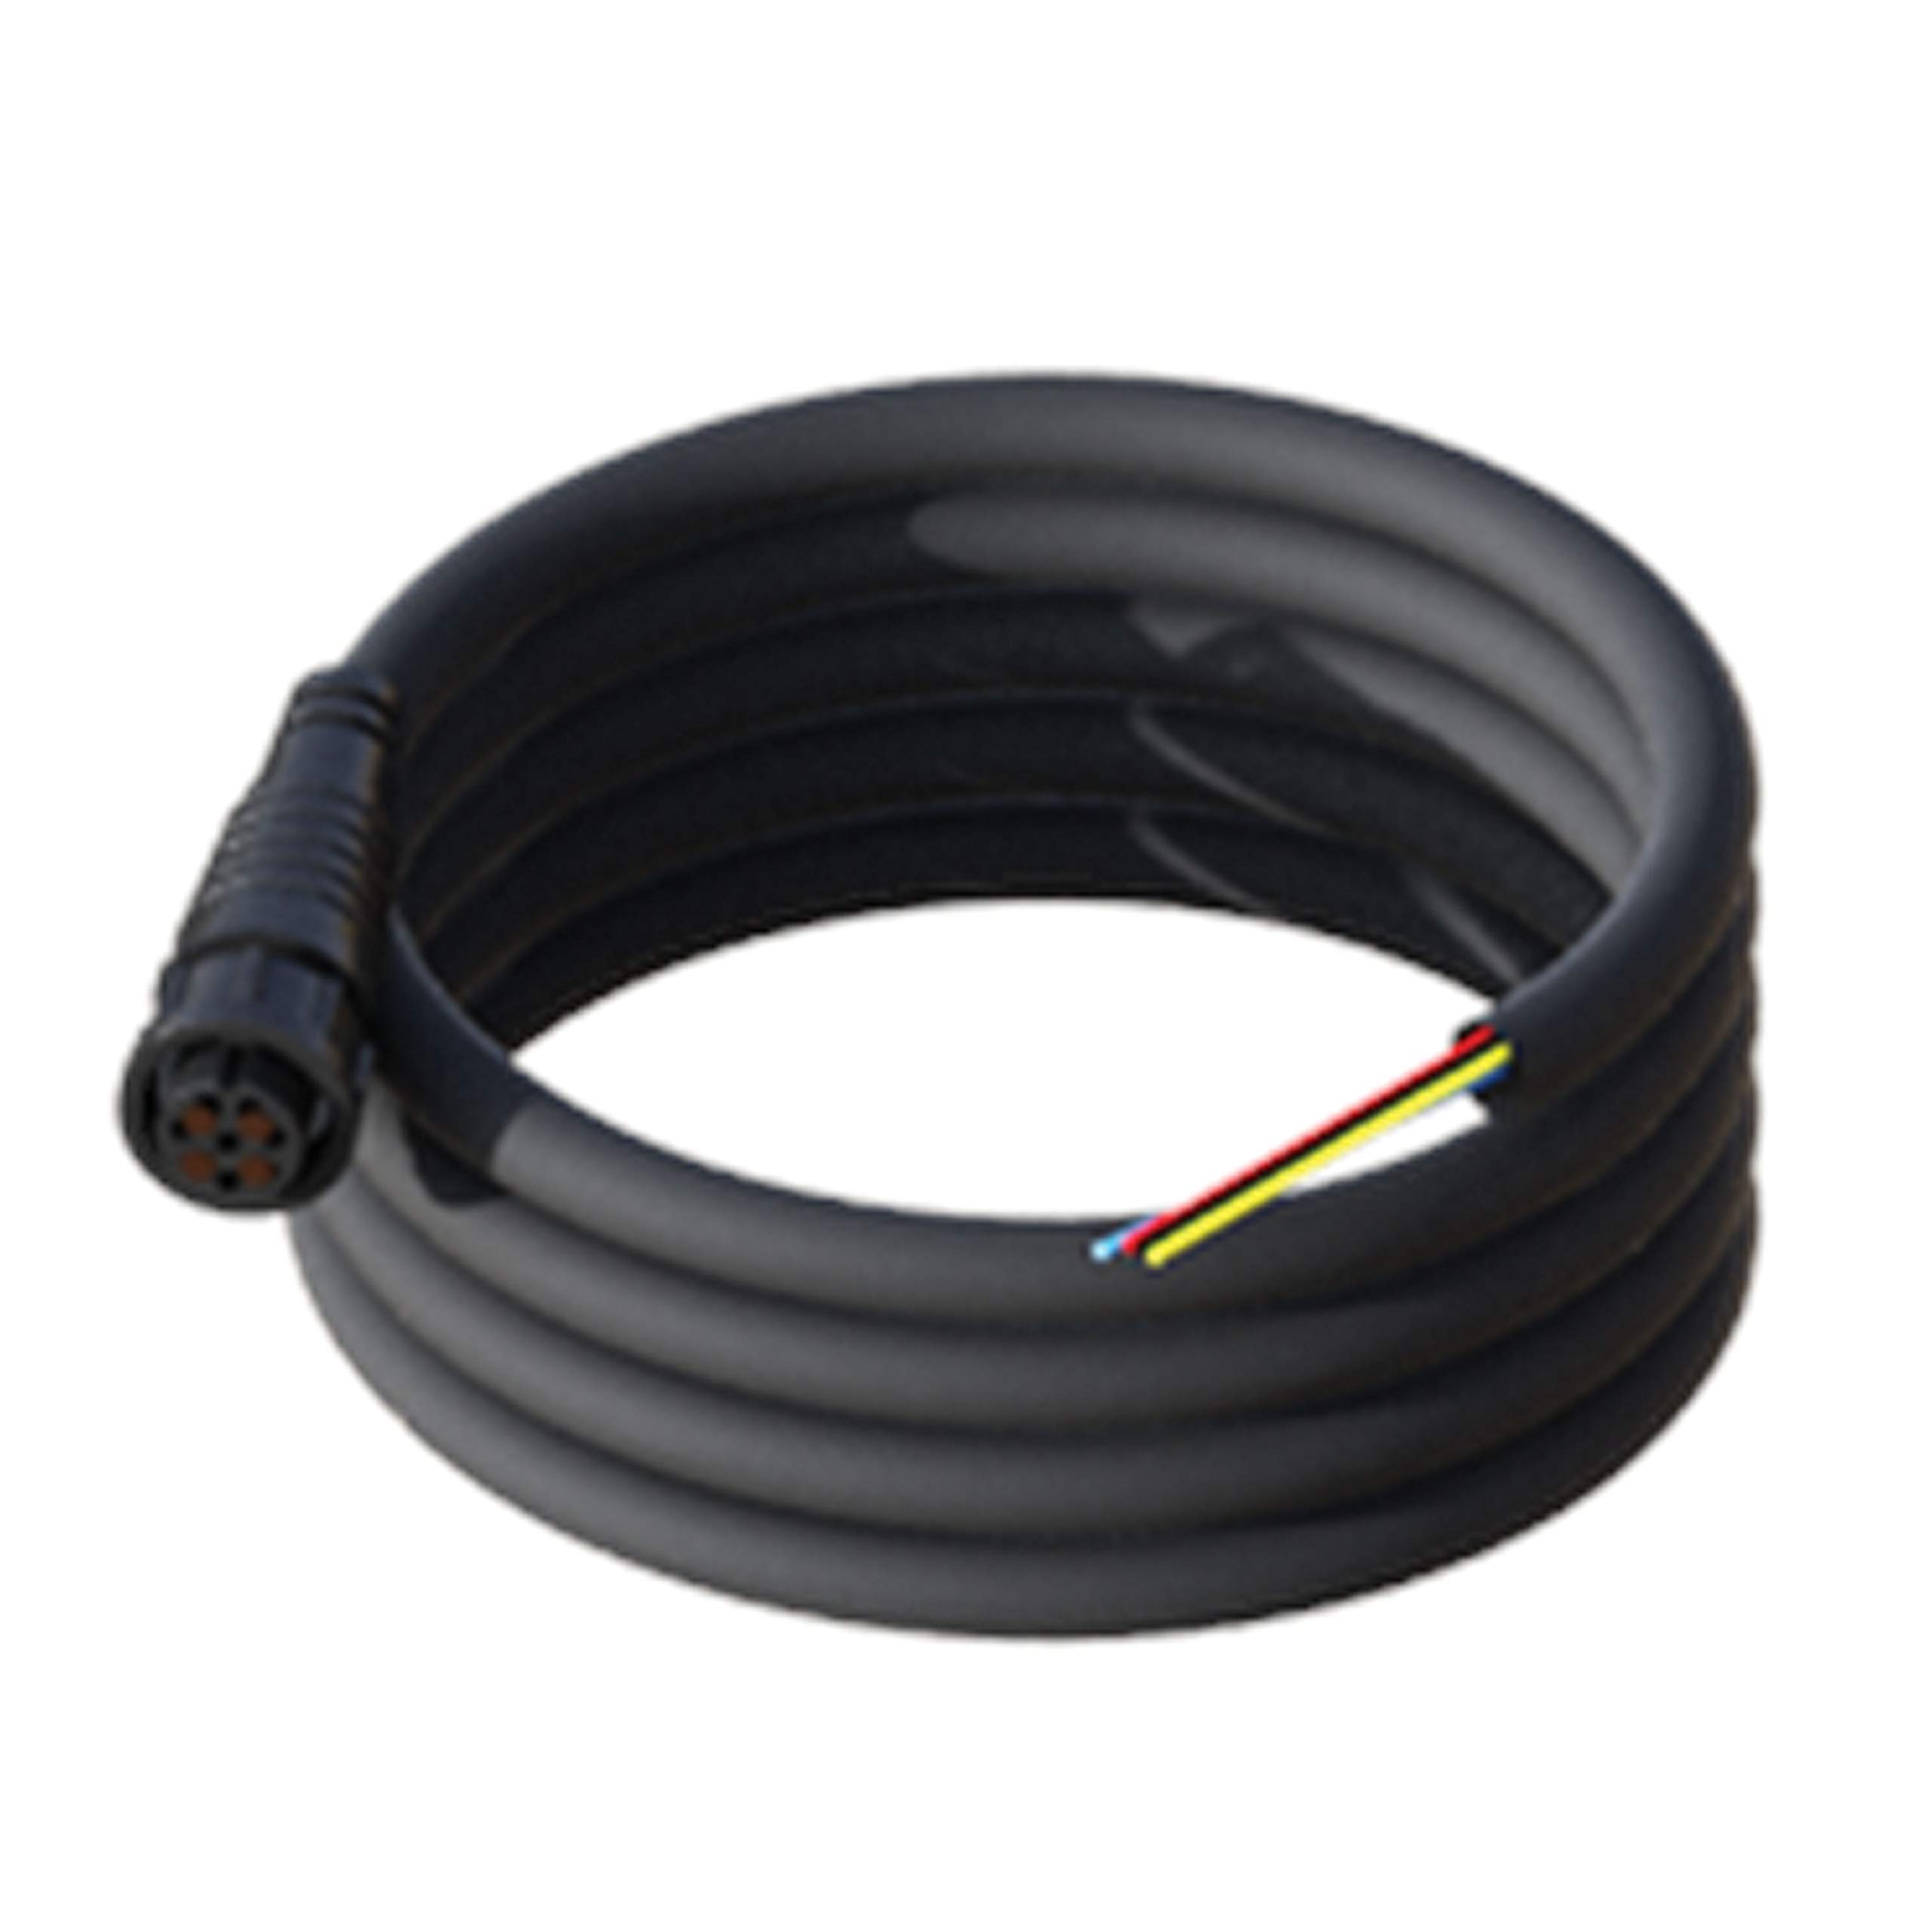 Simrad Power Cable:(4 Pin Conn. to 4 Bare Wires for Power in, Power Control Bus and External Alarm) 2 m (6.5 ft)